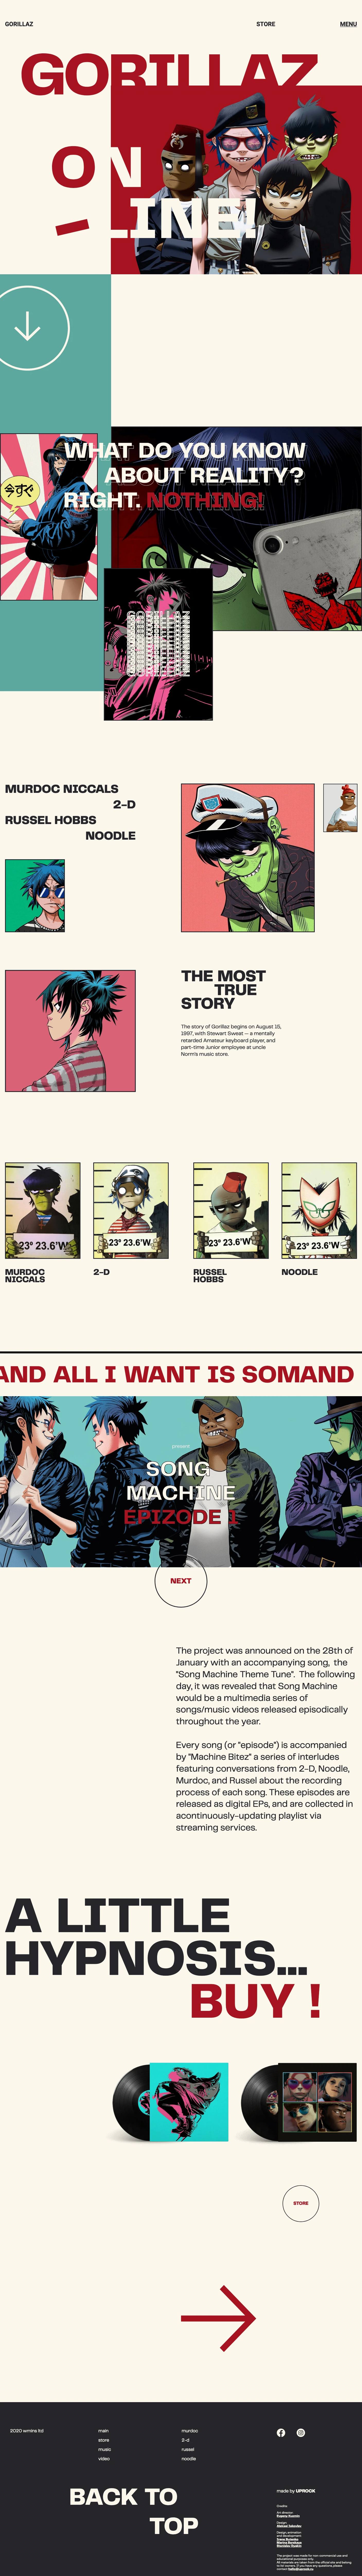 Gorillaz Landing Page Example: The story of Gorillaz begins on August 15, 1997, with Stewart Sweat — a mentally retarded Amateur keyboard player, and part-time Junior employee at uncle Norm's music store.